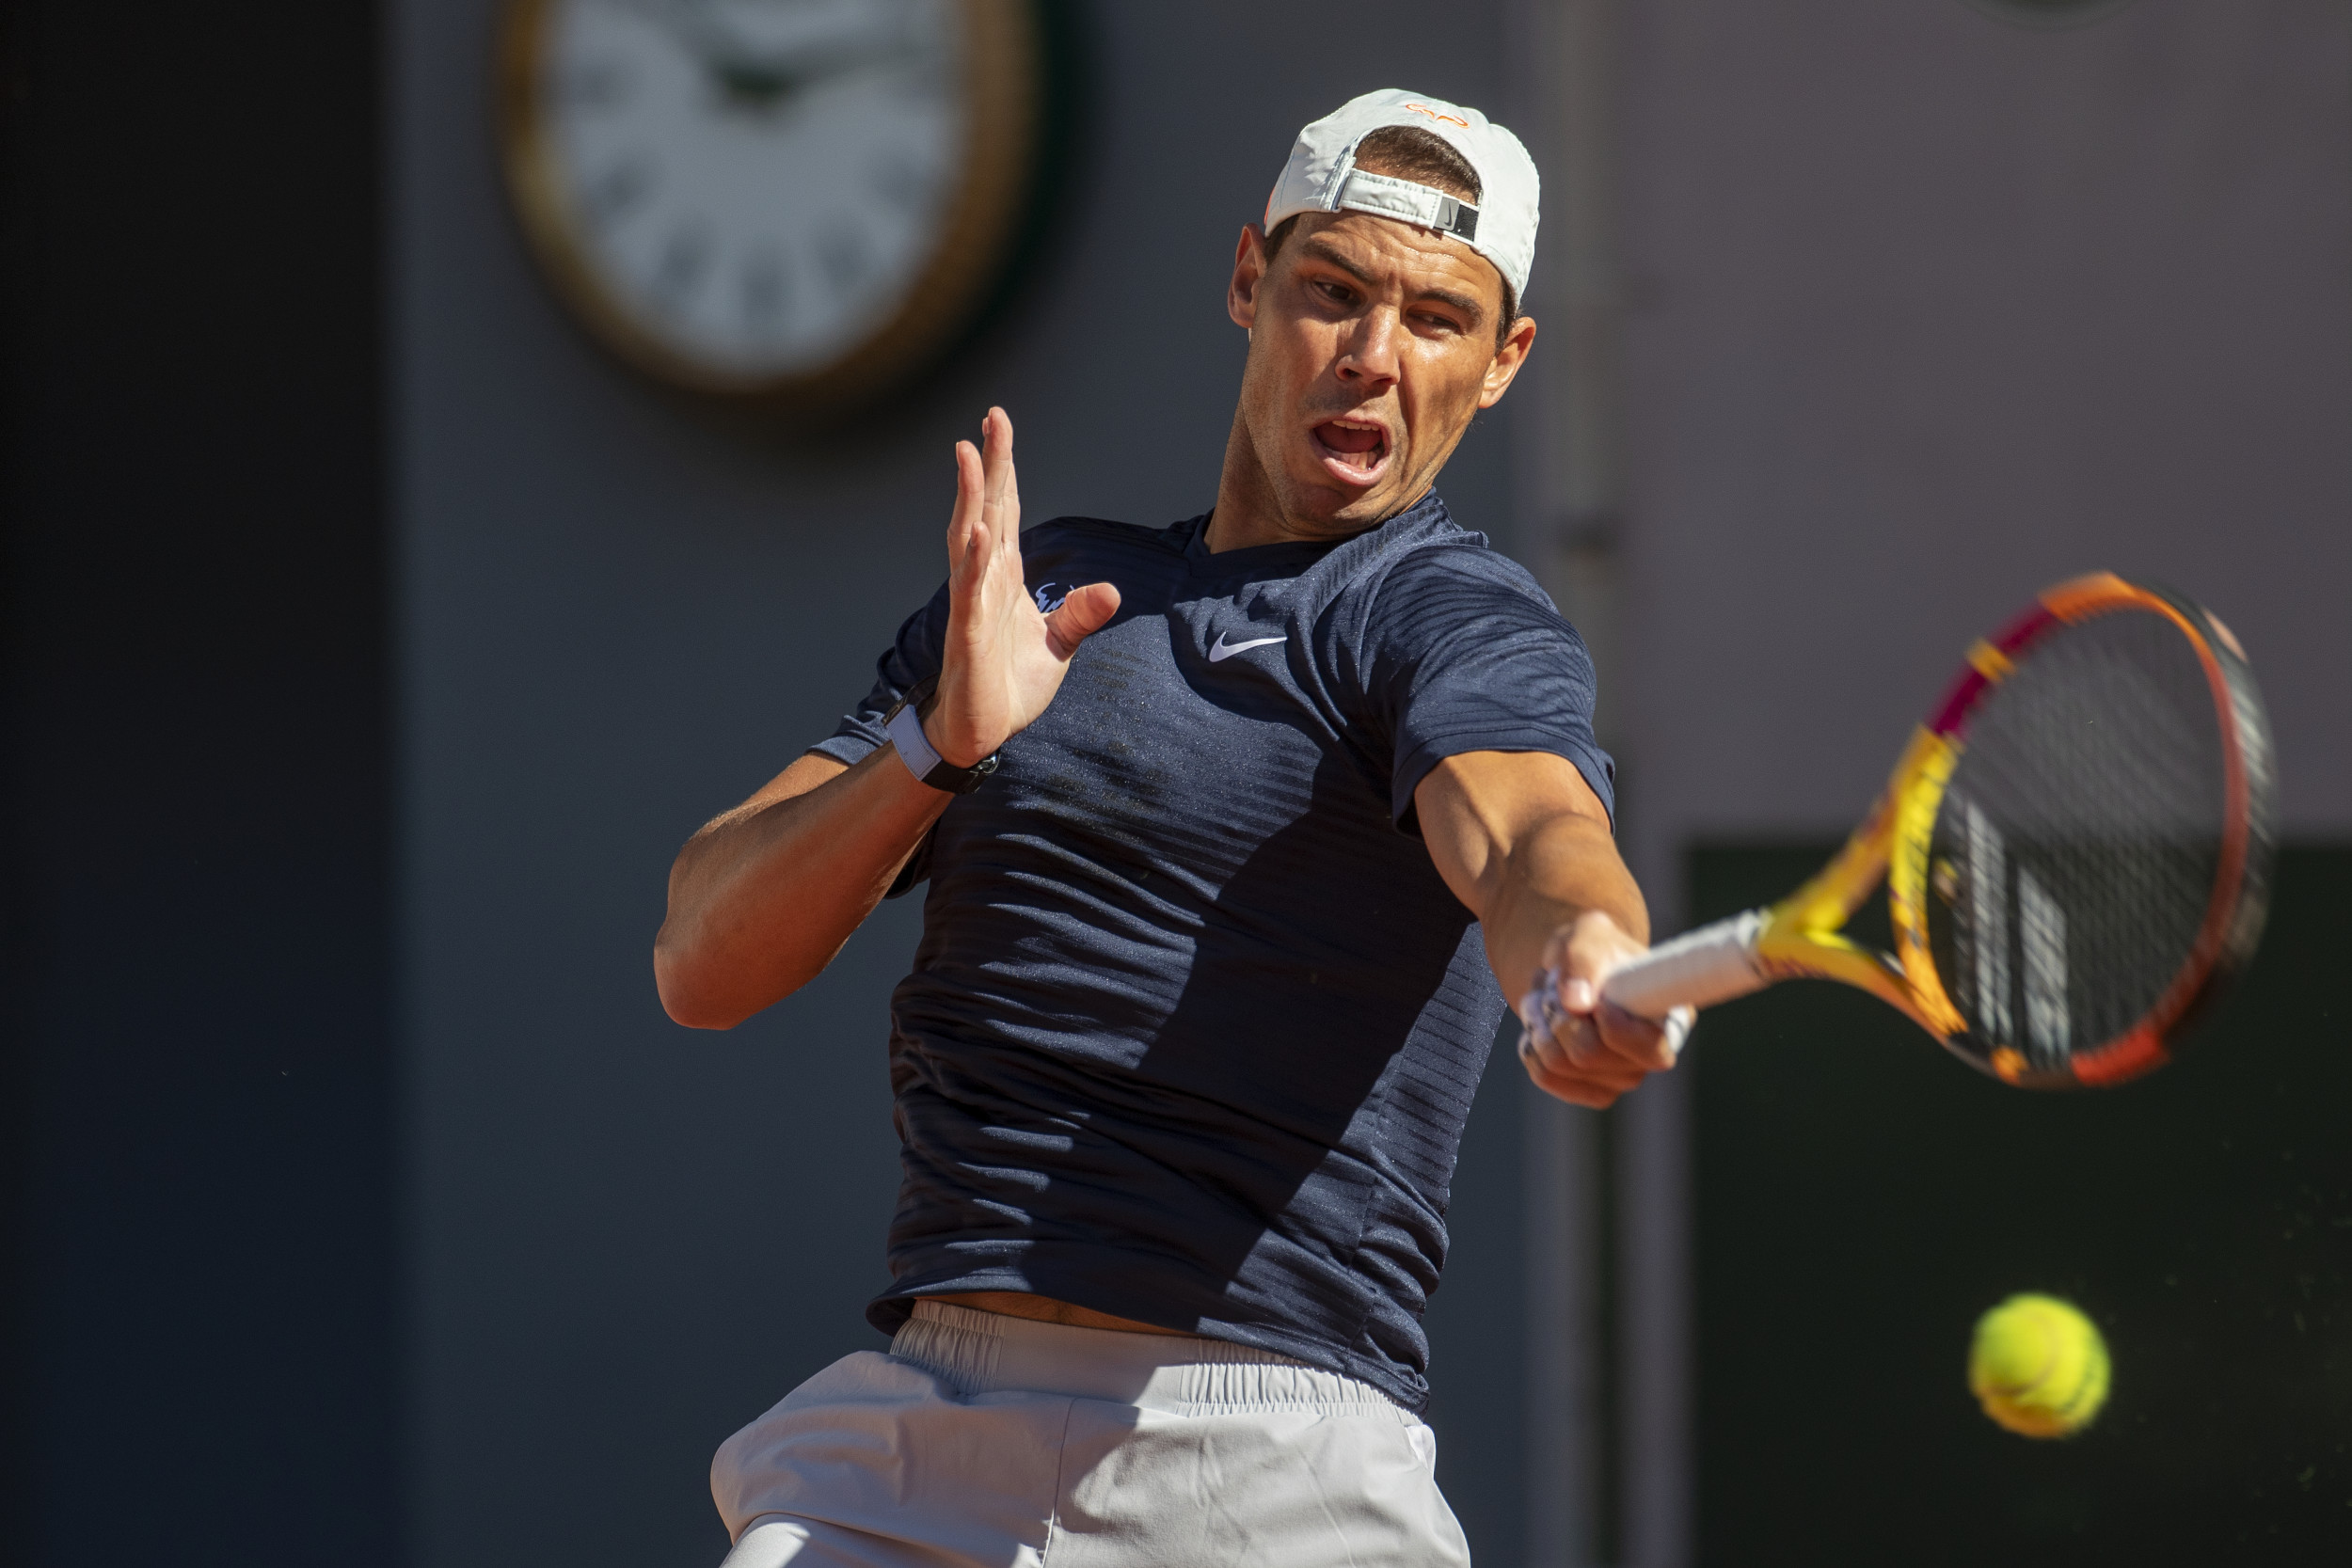 French Open Tennis 2021 How to Watch Federer and Nadal First Round Matches, Schedule, Live Stream